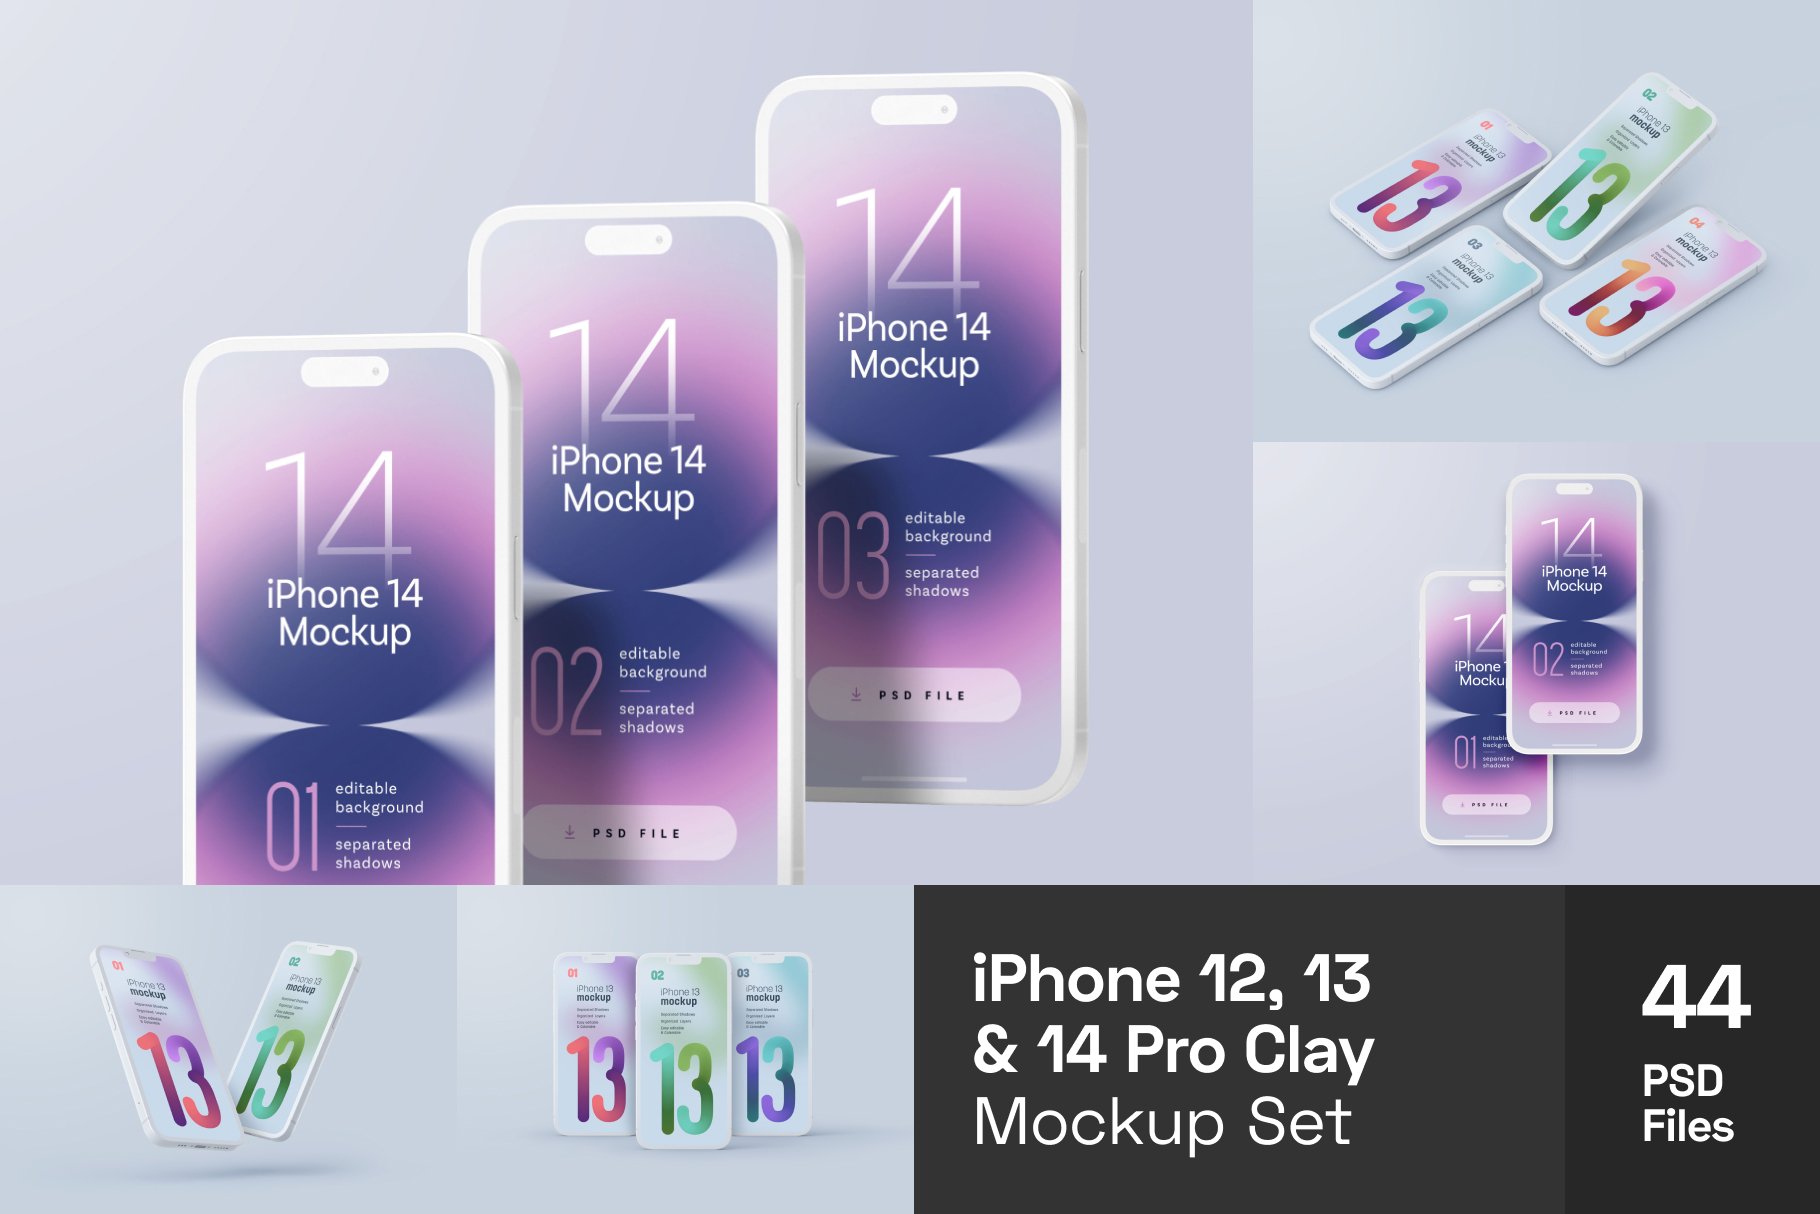 iPhone 12, 13, 14 Pro Clay Mockup cover image.